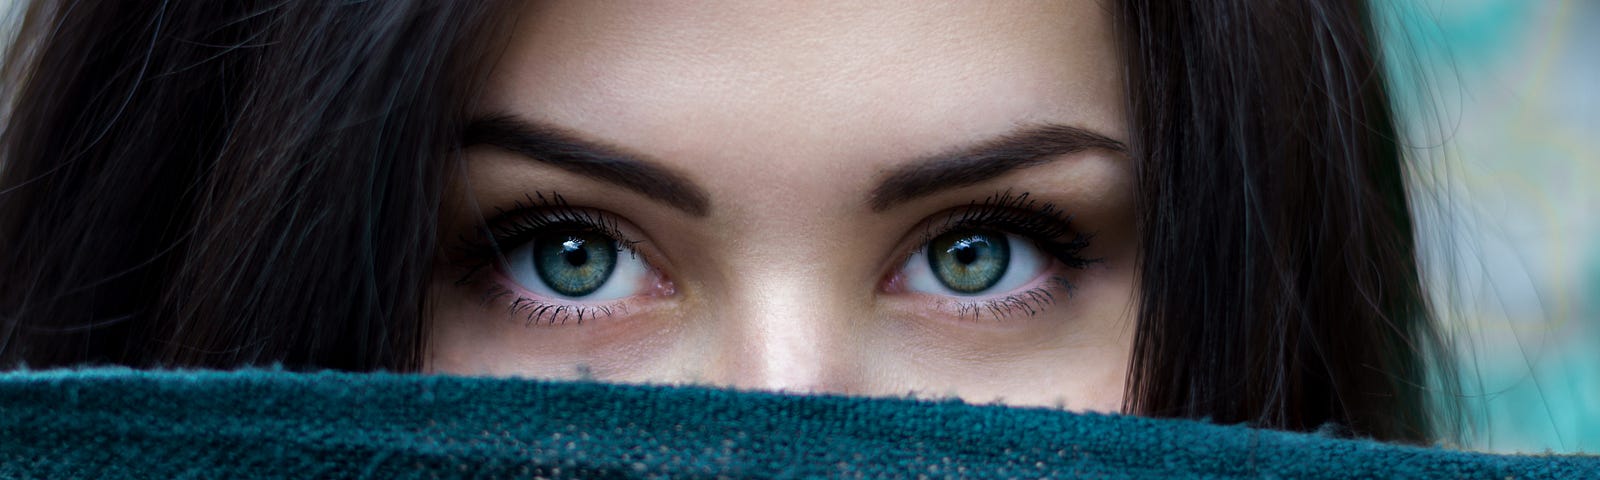 Dark-haired woman with big green eyes looking over a blue cloth that covers the bottom portion of her face.